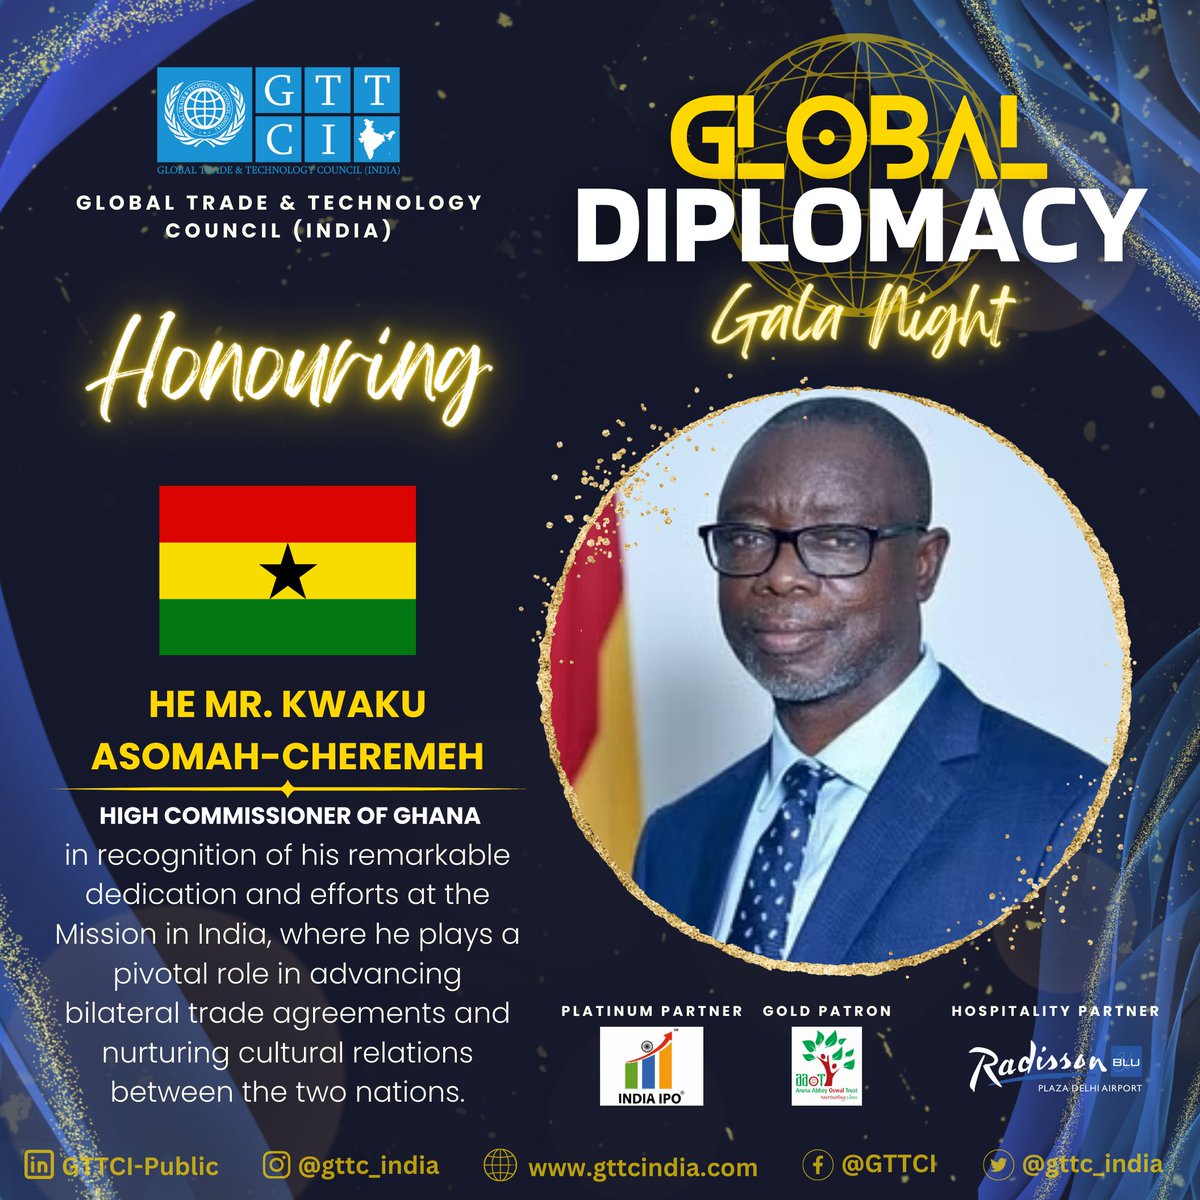 🌟 Honouring H.E. Mr. Kwaku Asomah-Cheremeh 🇬🇭, High Commissioner of Ghana, at GTTCI's Global Diplomacy Gala Night❗

Celebrating his outstanding contributions to strengthening 🇮🇳India-🇬🇭Ghana relations. 🤝🌐

#DiplomacyMatters #GTTCIEvents #HonoringExcellence #CulturalRelations